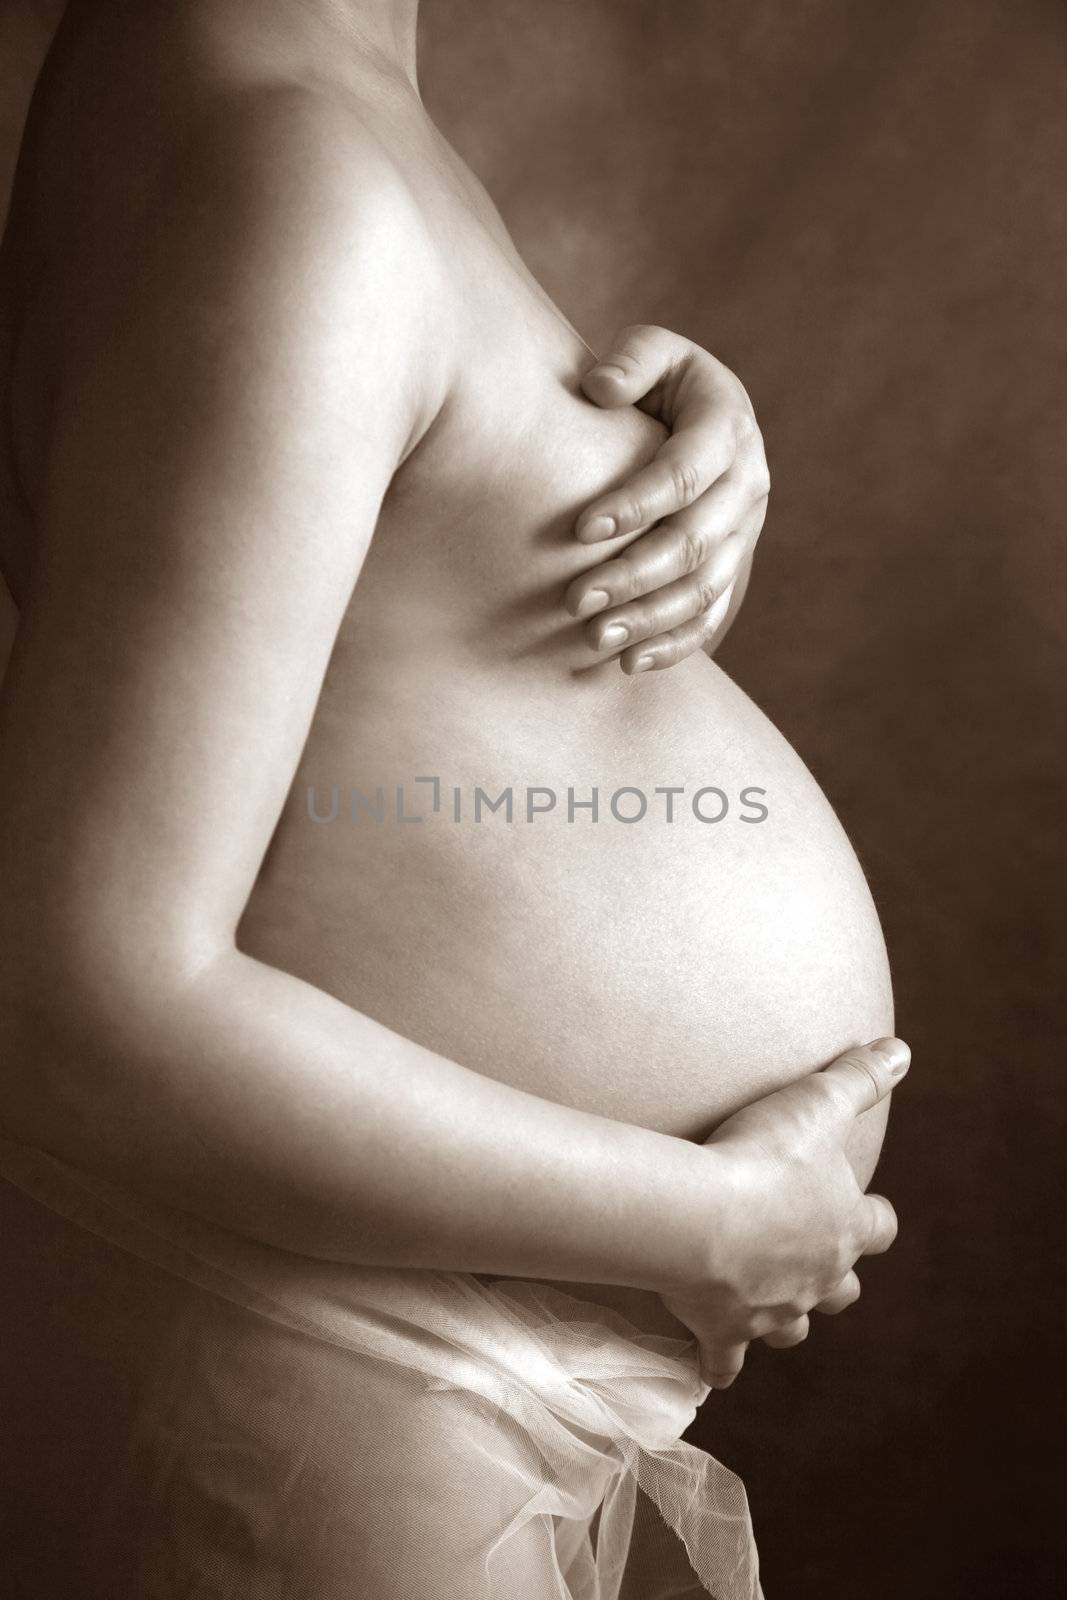 The pregnant woman on the ninth month. The boy was born